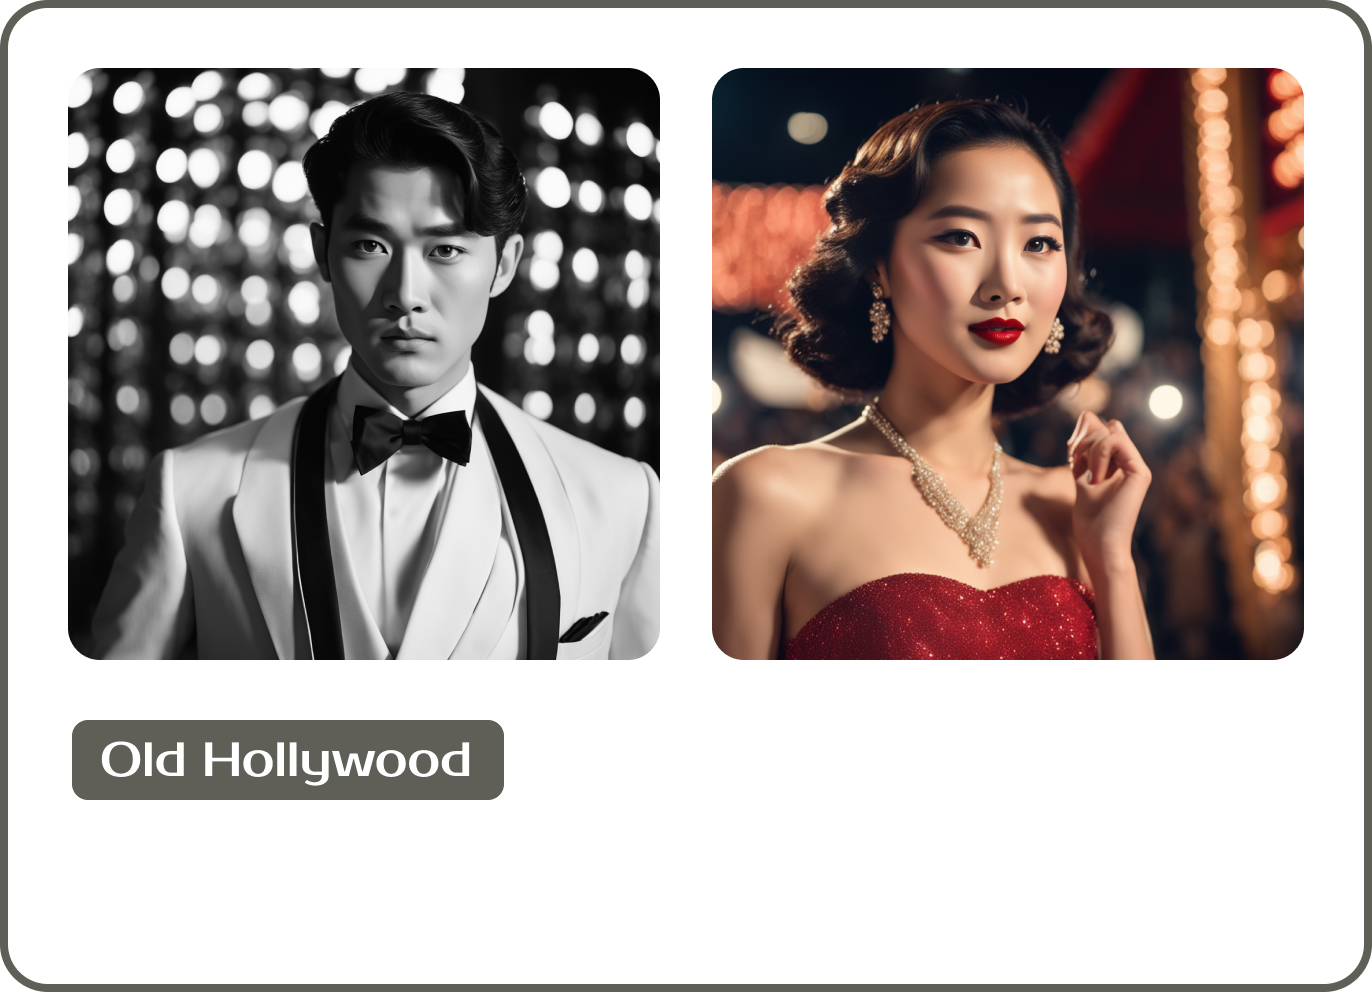 Old Hollywood theme image